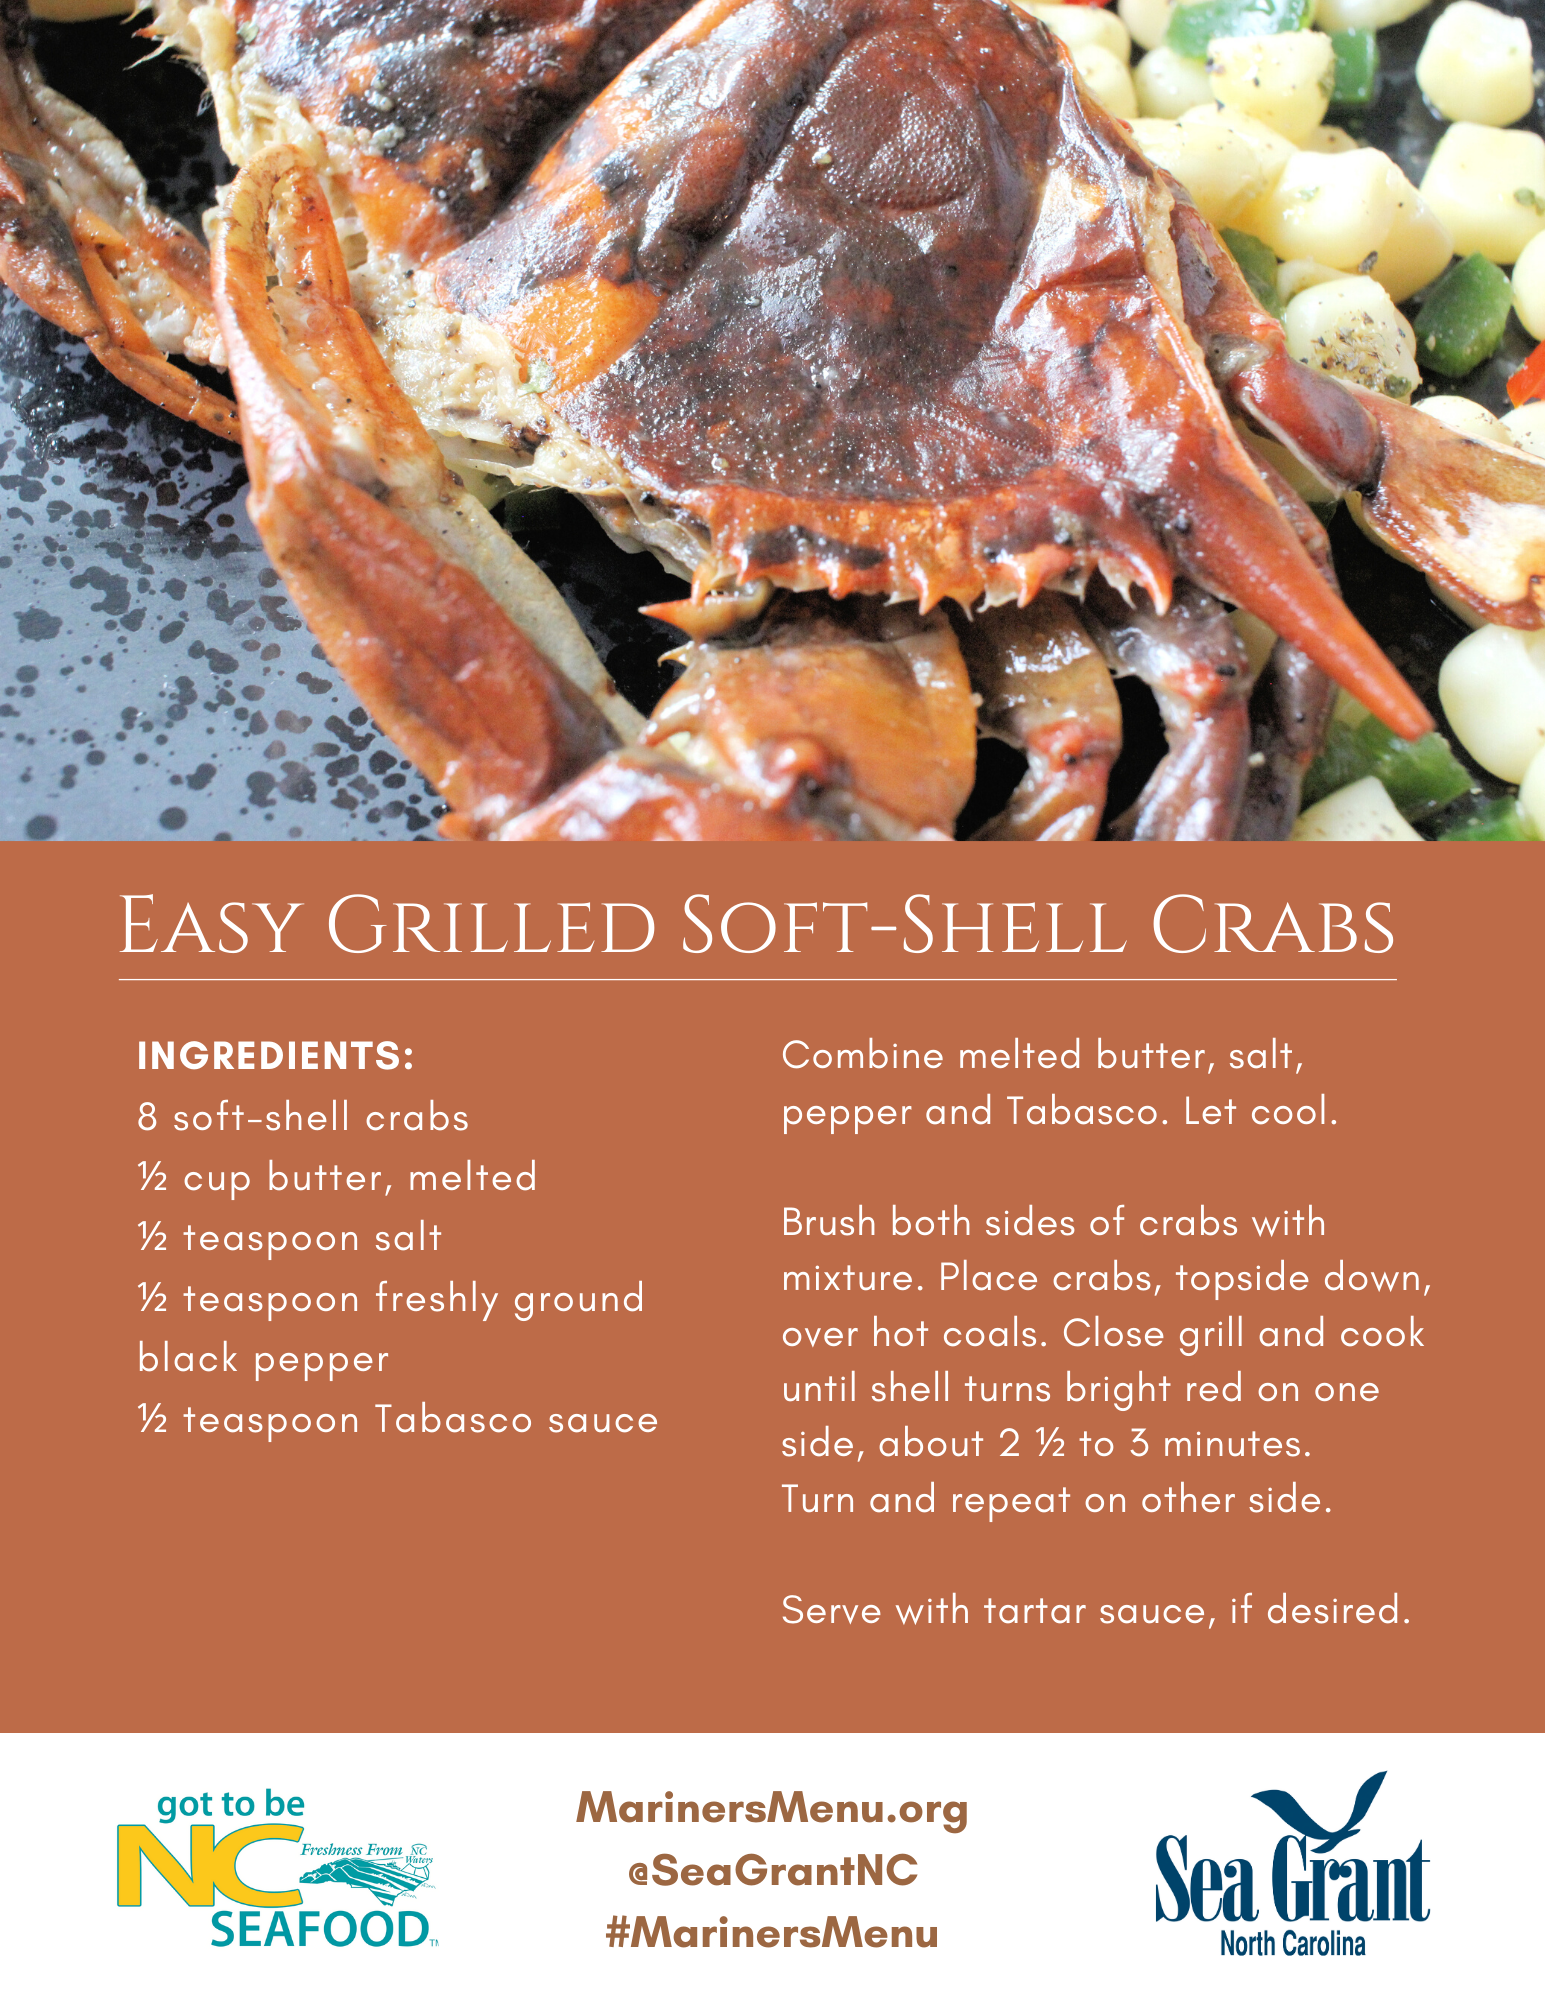 Easy Grilled Soft-Shell Crabs